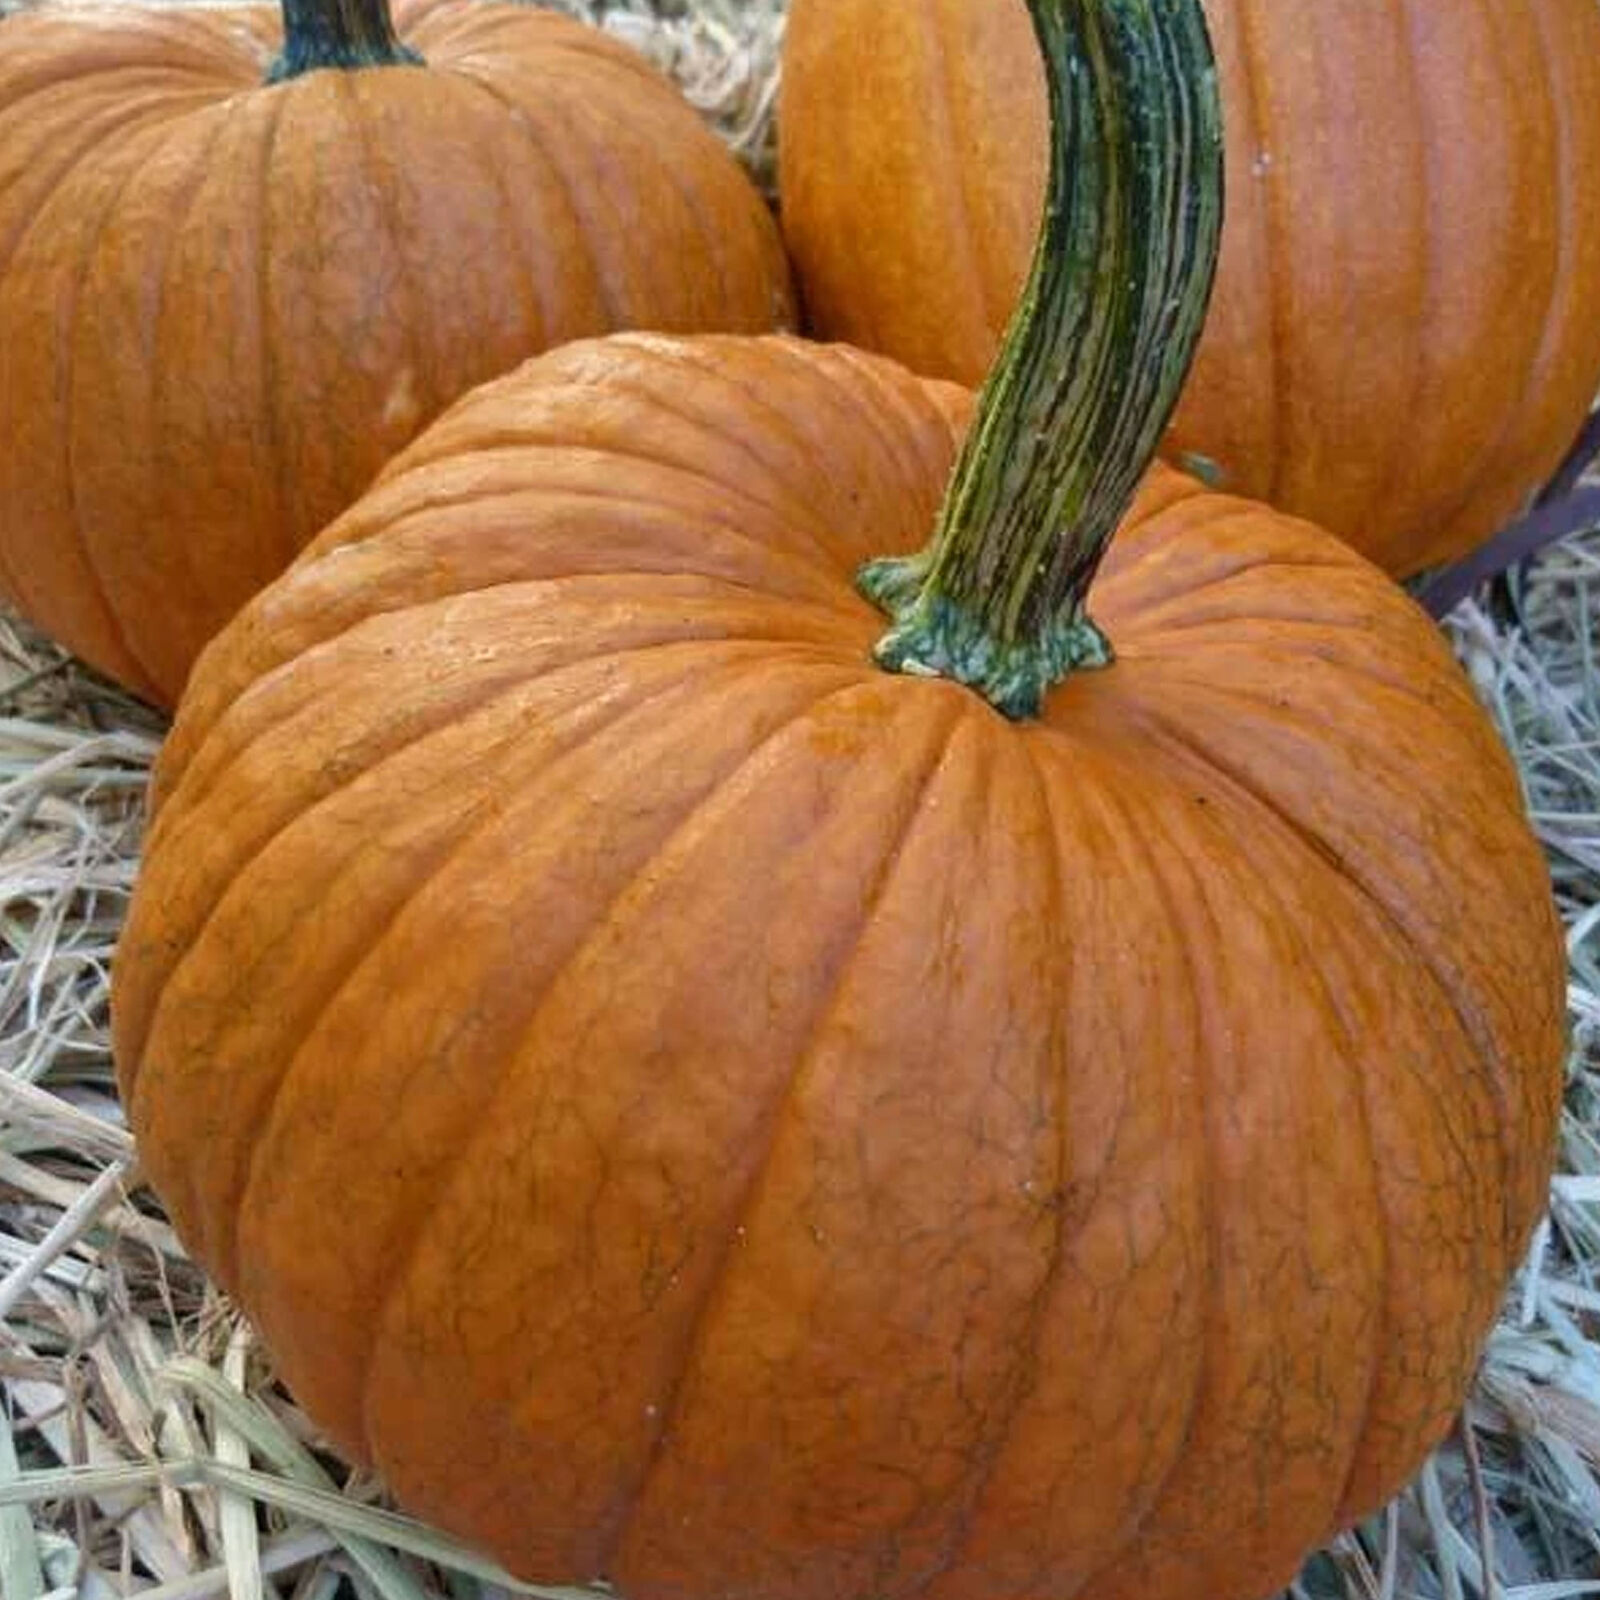 Primary image for SHIP FROM US ORGANIC SMALL SUGAR PUMPKIN SEEDS - 8 OZ SEEDS - NON-GMO, TM11